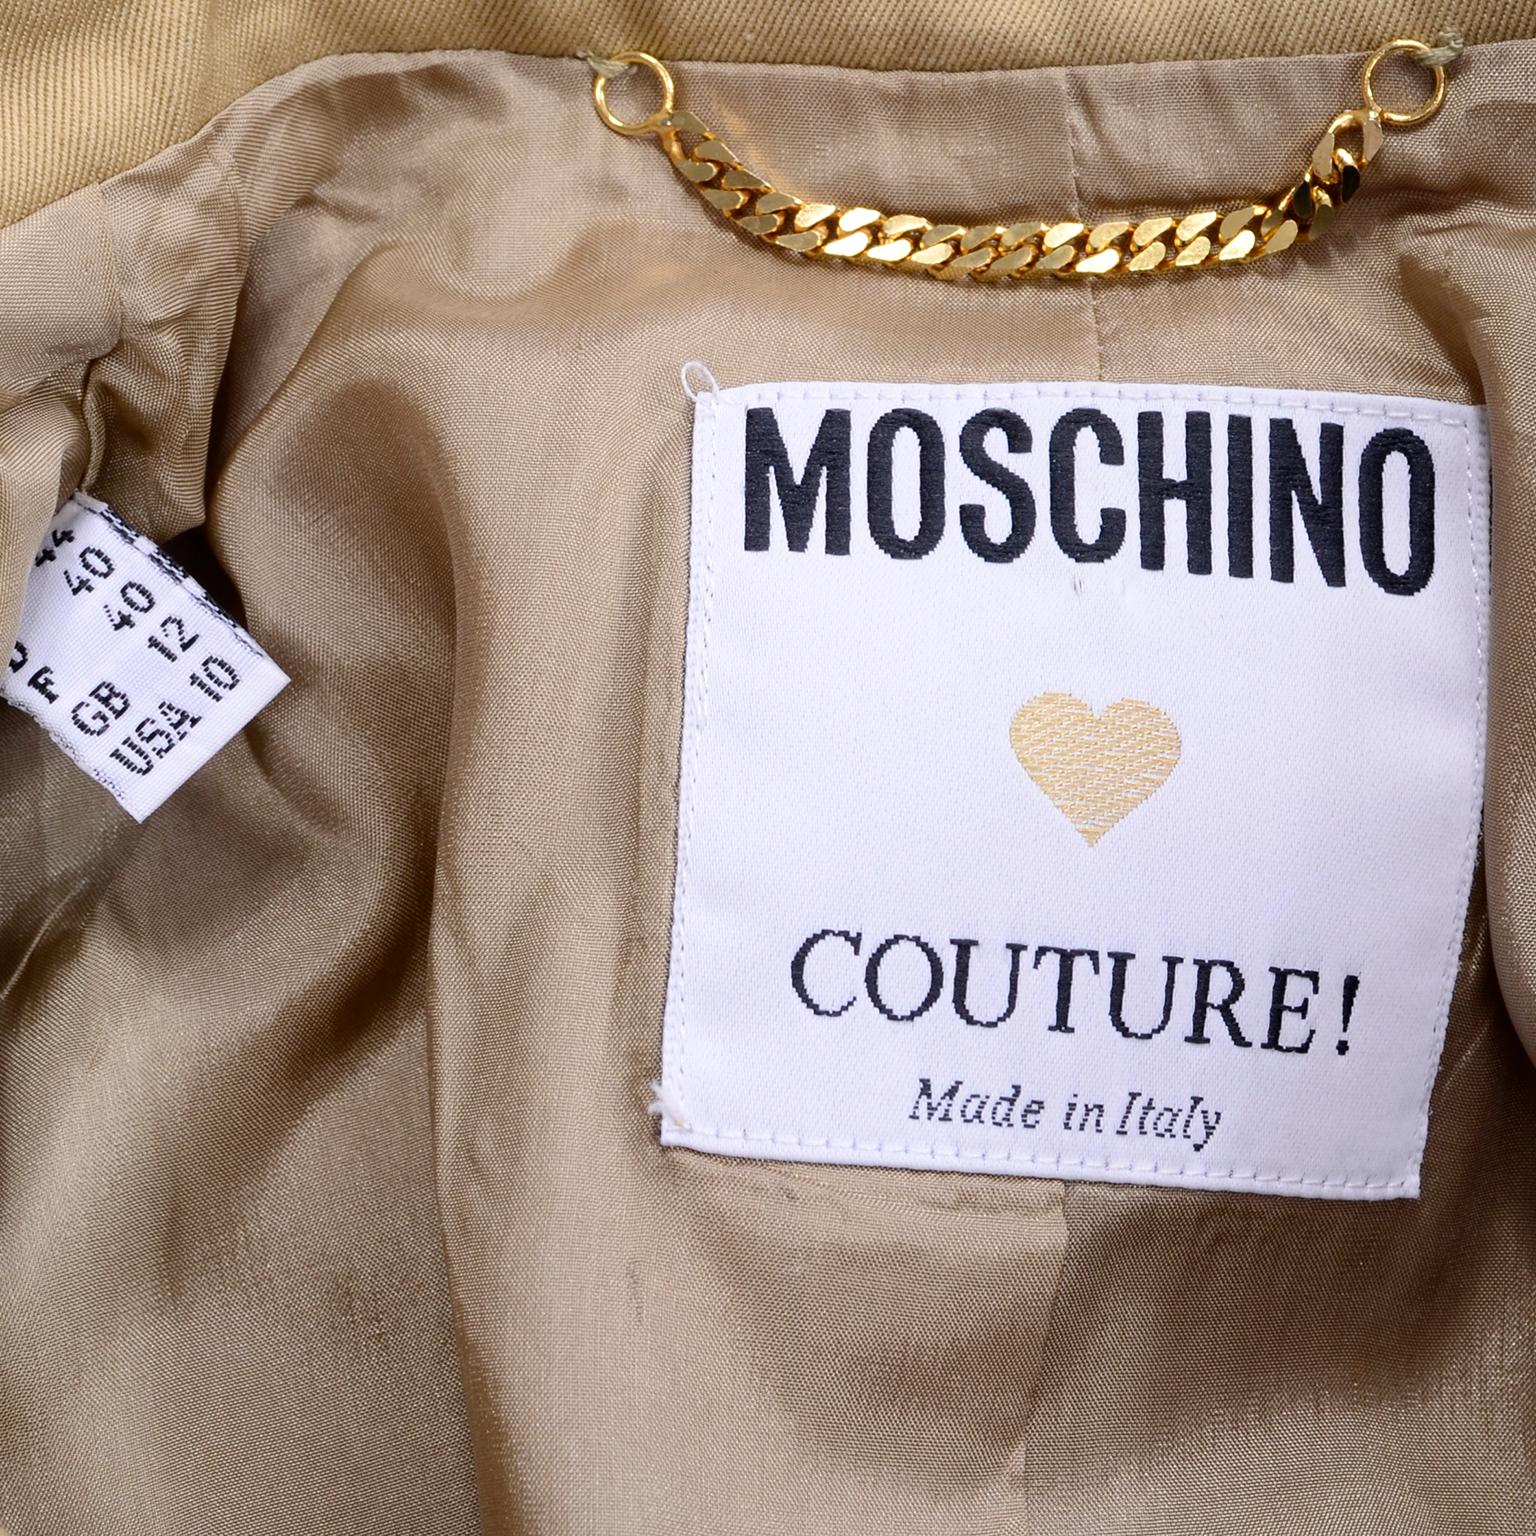 1991 Franco Moschino Couture Survival Jacke in Khaki Baumwolle Urban Jungle Tools 12